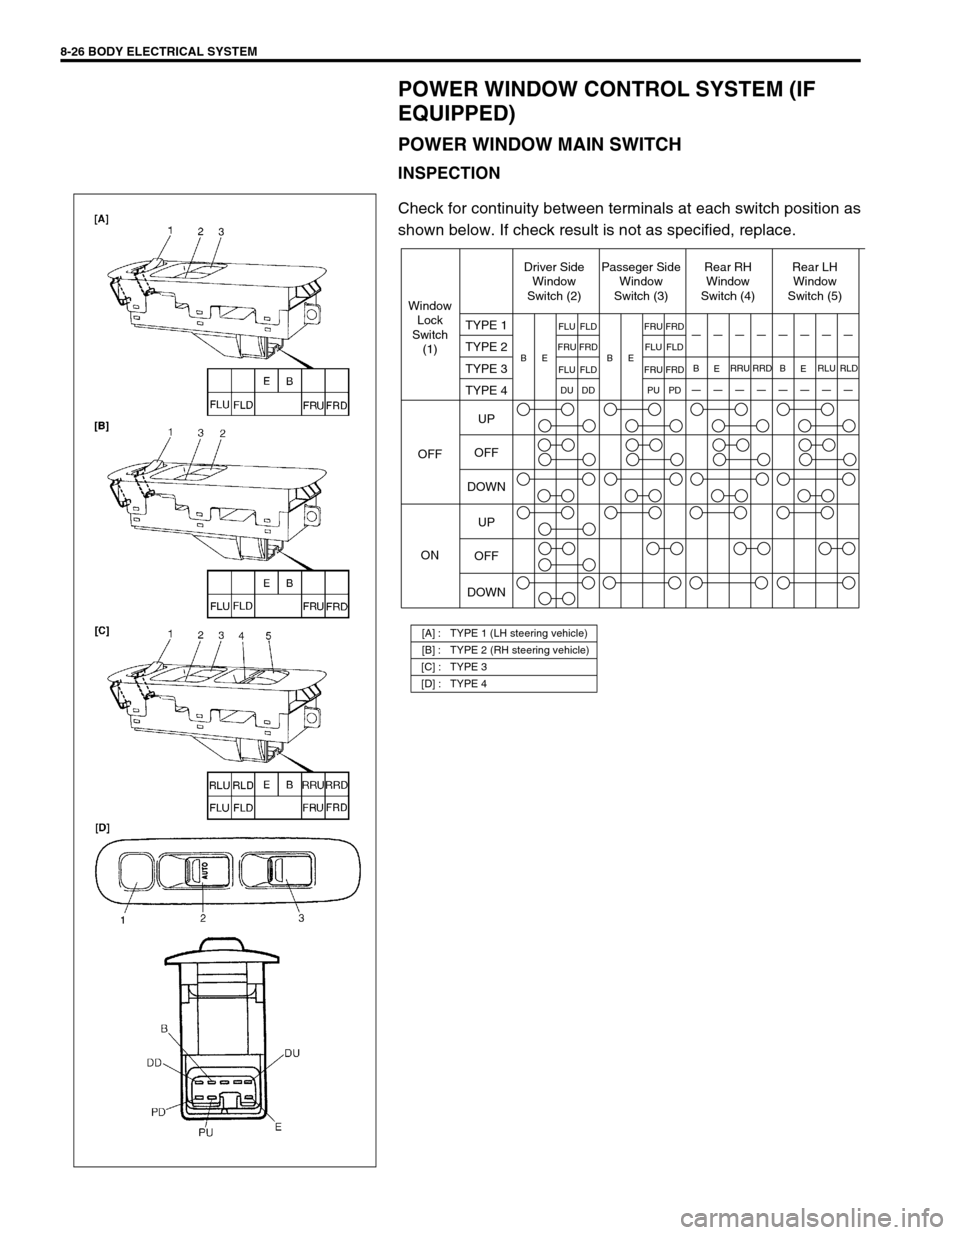 SUZUKI SWIFT 2000 1.G Transmission Service Workshop Manual 8-26 BODY ELECTRICAL SYSTEM
POWER WINDOW CONTROL SYSTEM (IF 
EQUIPPED)
POWER WINDOW MAIN SWITCH
INSPECTION
Check for continuity between terminals at each switch position as
shown below. If check resul